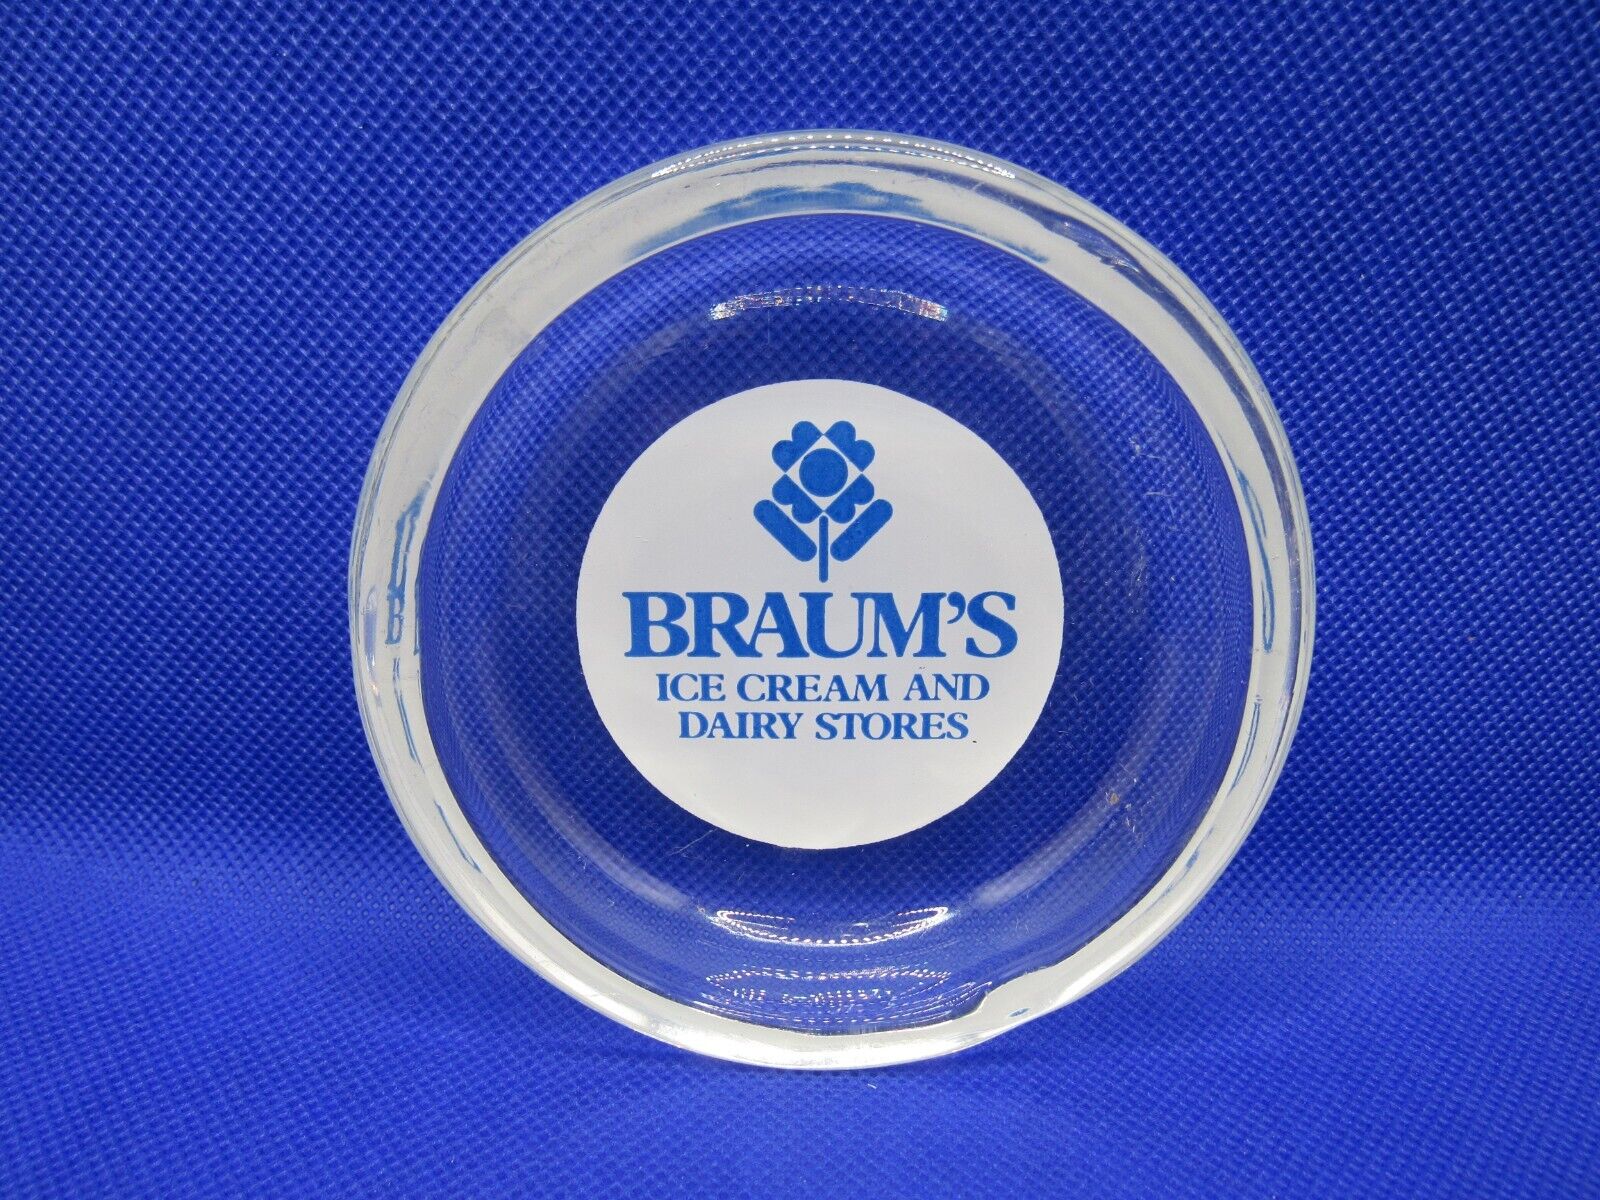 Vintage Braum's Ice Cream nnd Dairy Stores Clear Glass Advertising Ashtray NICE